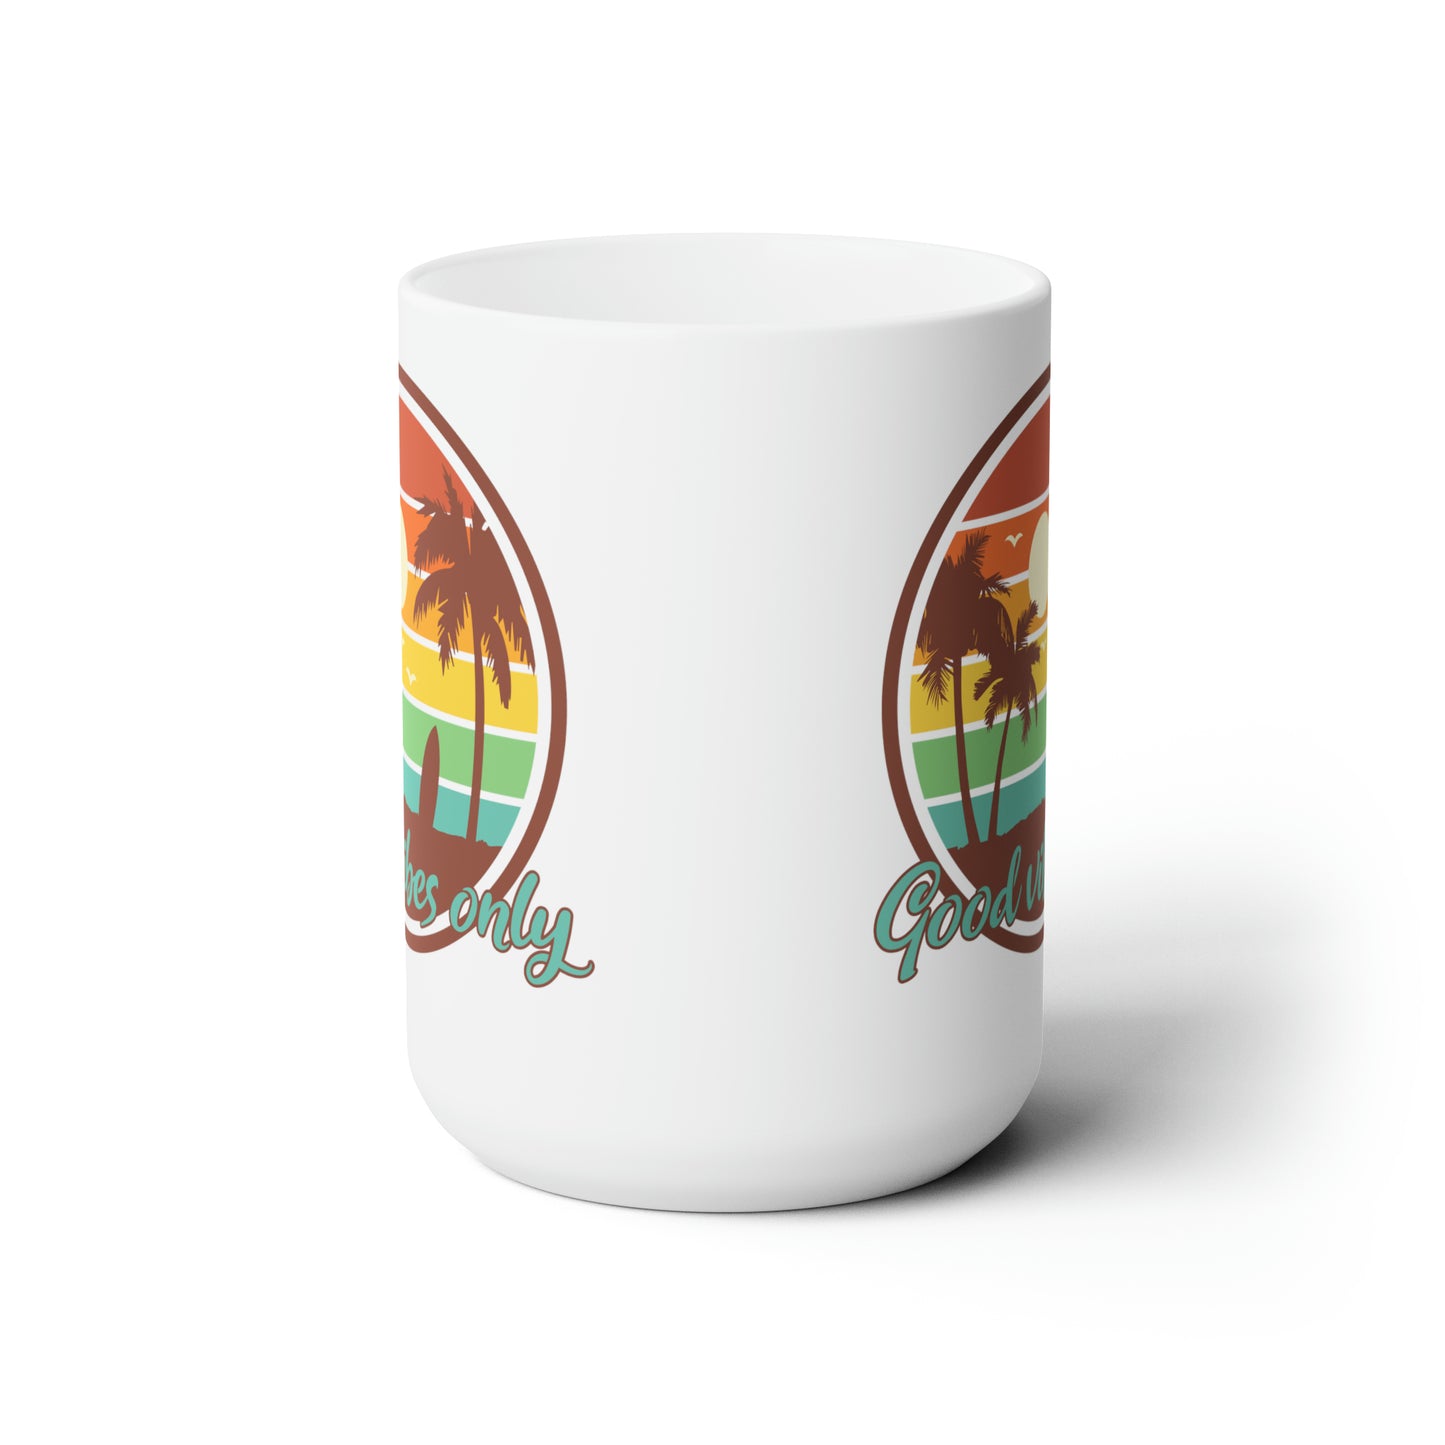 Good Vibes Only Coffee Mug For Beach Scene Hot Tea Cup With Palm Trees